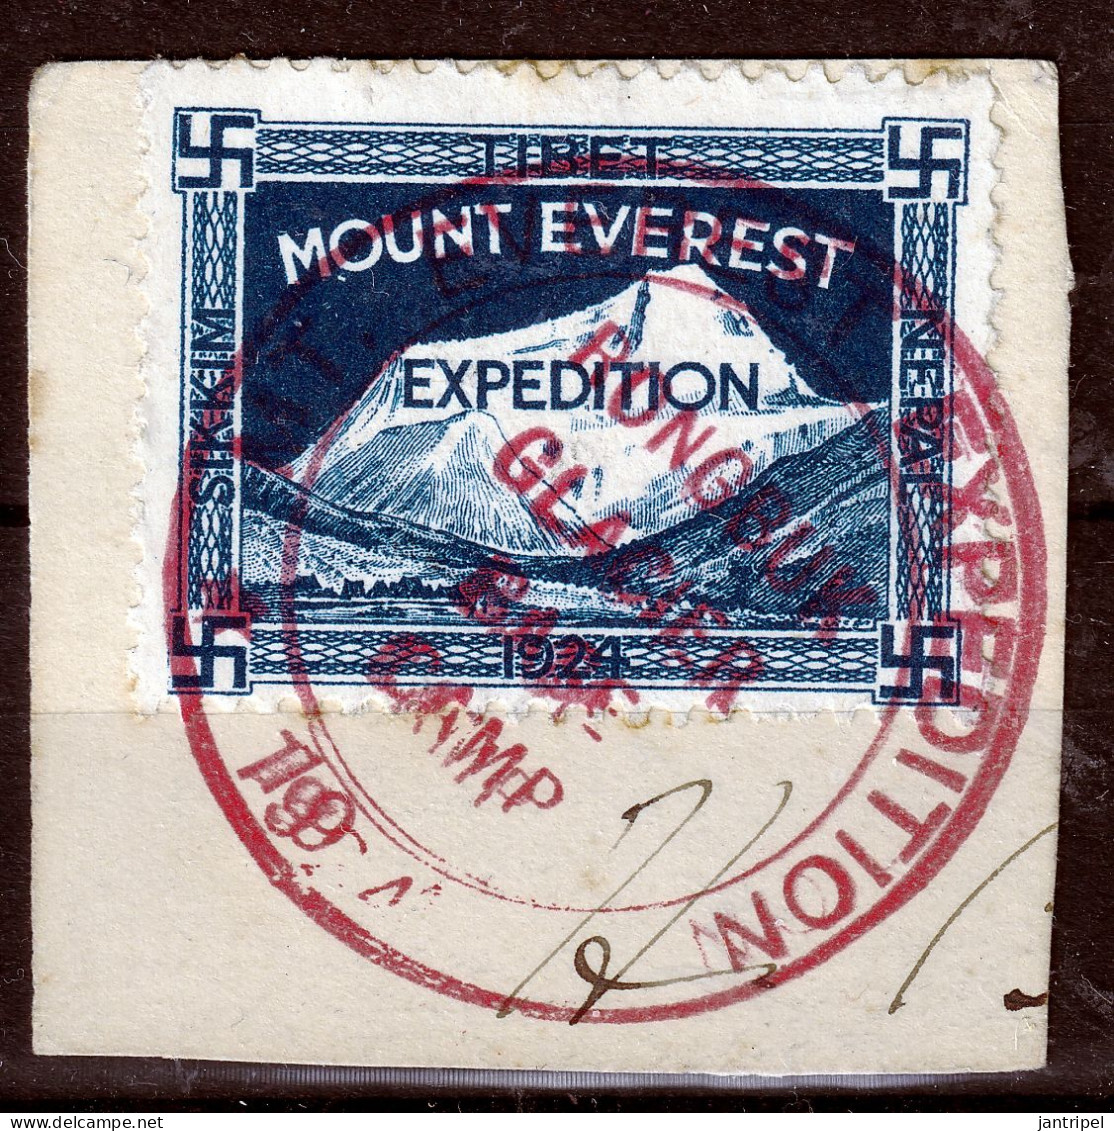 TIBET 1924 MOUNT EVEREST EXPEDITION RONGBUK GLACIER BASE CAMP CANCELLATION On COVER FRAGMENT - Andere-Azië